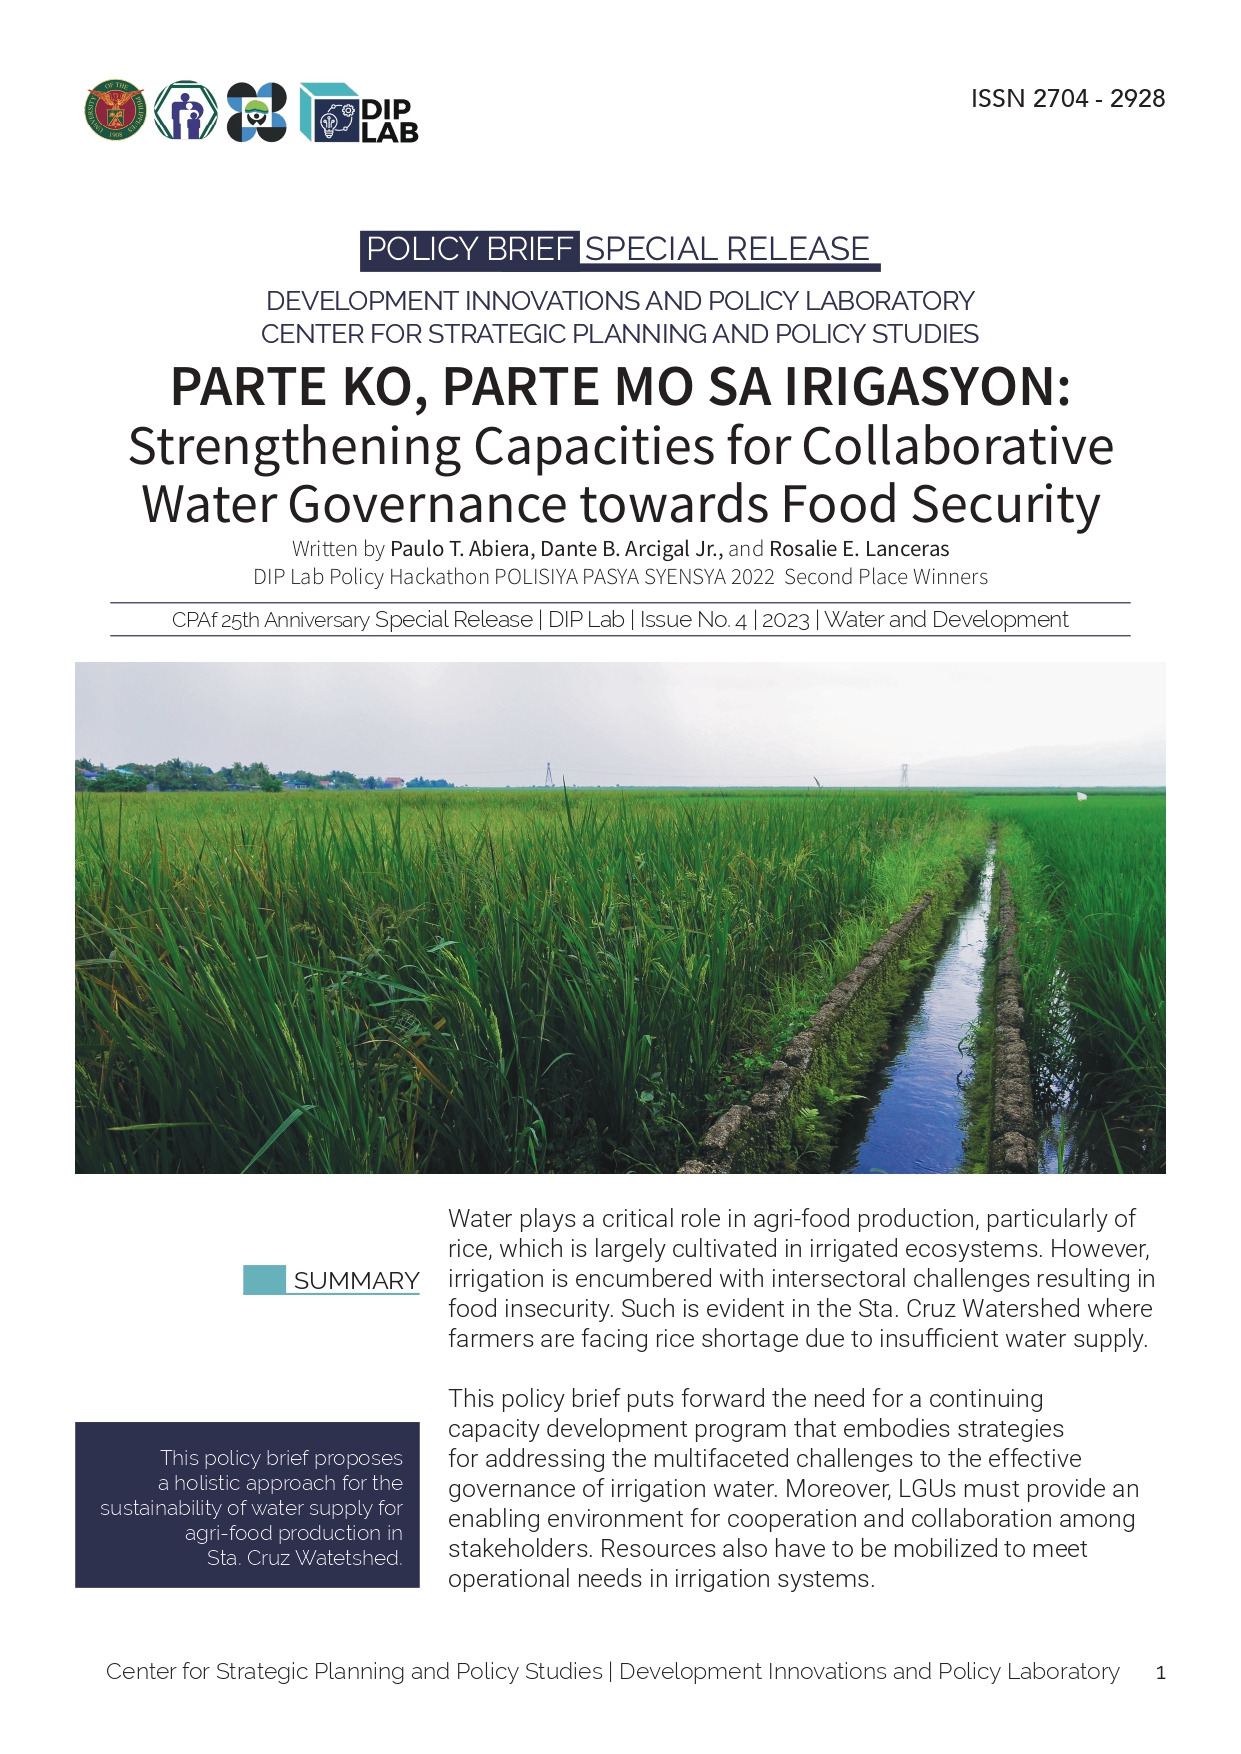 <strong>PARTE KO, PARTE MO SA IRIGASYON:<br>Strengthening Capacities for Collaborative<br>Water Governance towards Food Security</strong>